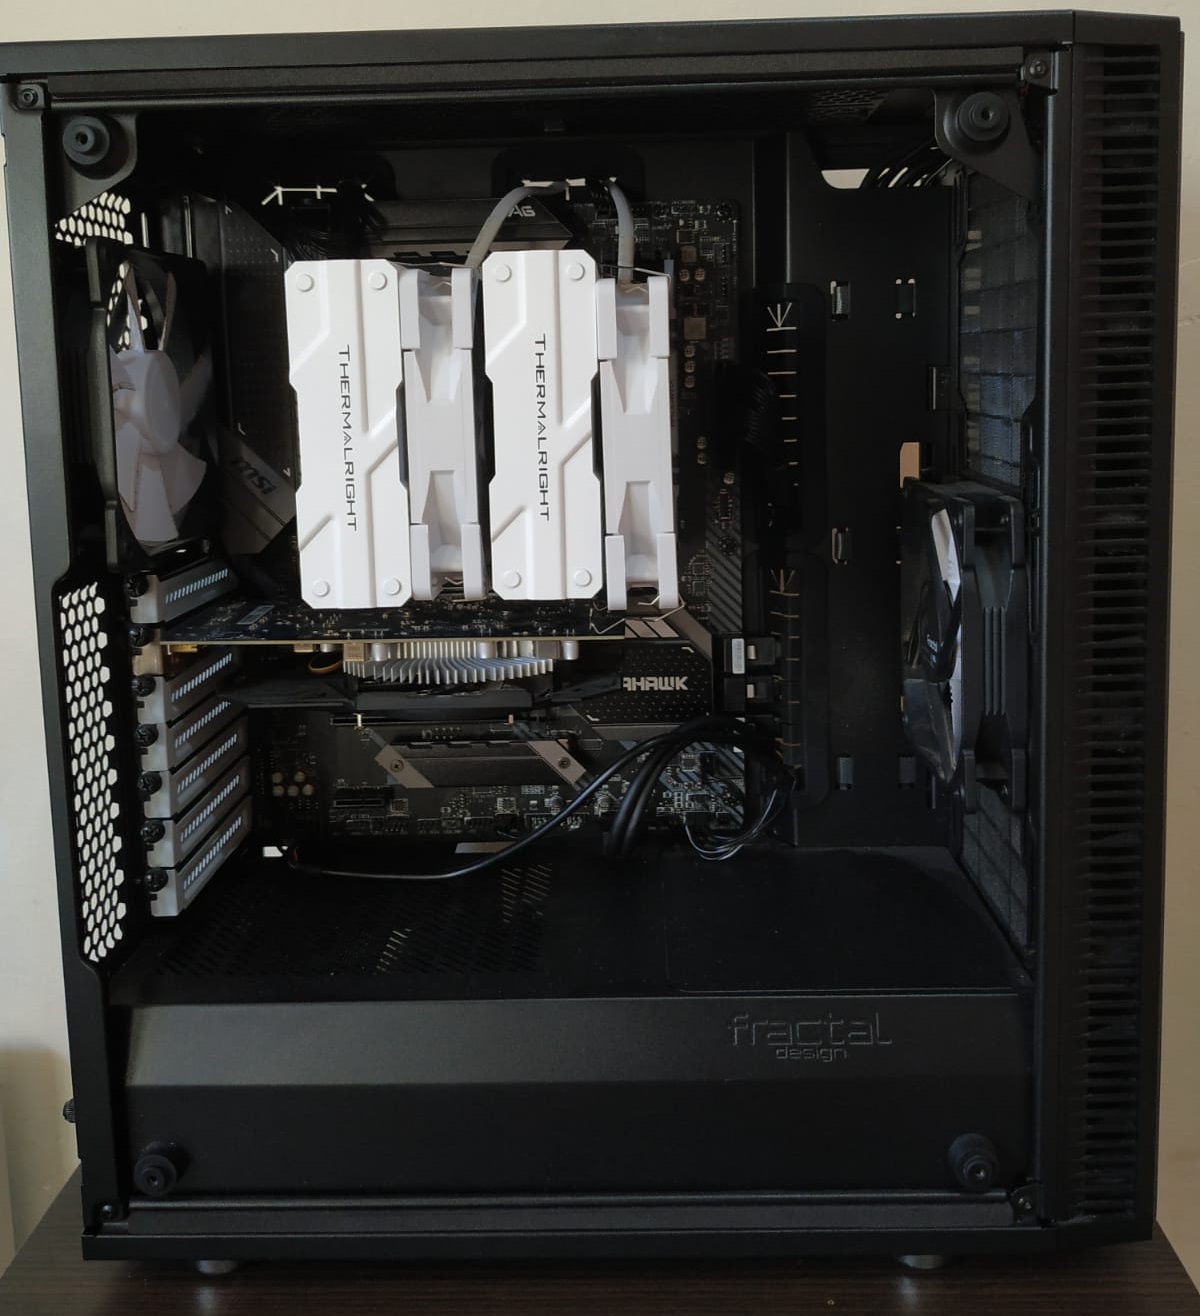 Thermalright Peerless Assassin 120 initial impression and review